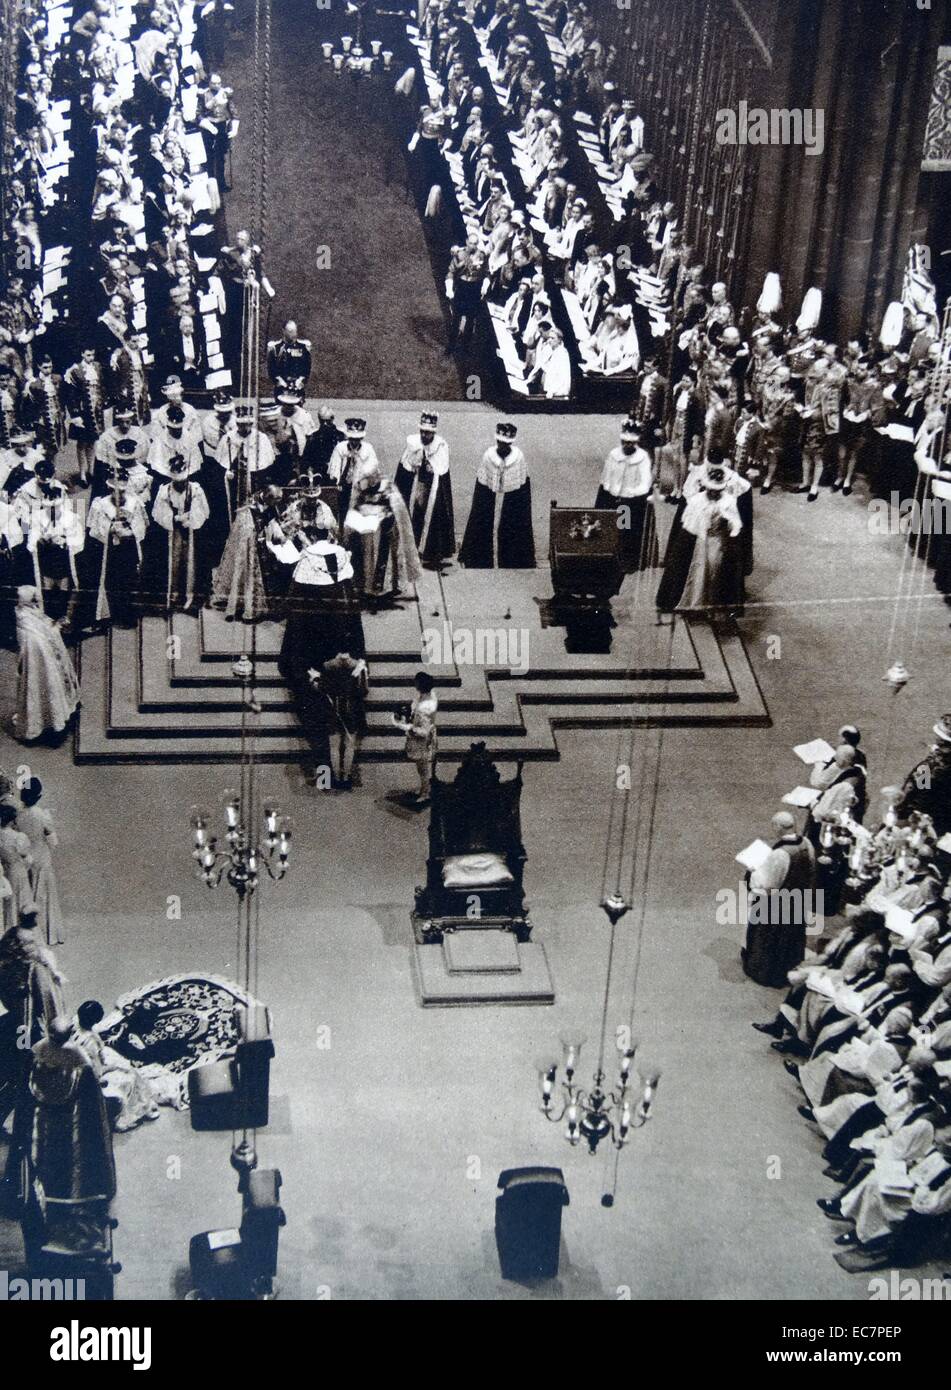 Coronation of British King George VI in Westminster Abbey. George VI (Albert Frederick Arthur George; 14 December 1895 – 6 February 1952) King of the United Kingdom and the Dominions of the British Commonwealth from 11 December 1936 until his death. He was the last Emperor of India and the first Head of the Commonwealth Stock Photo